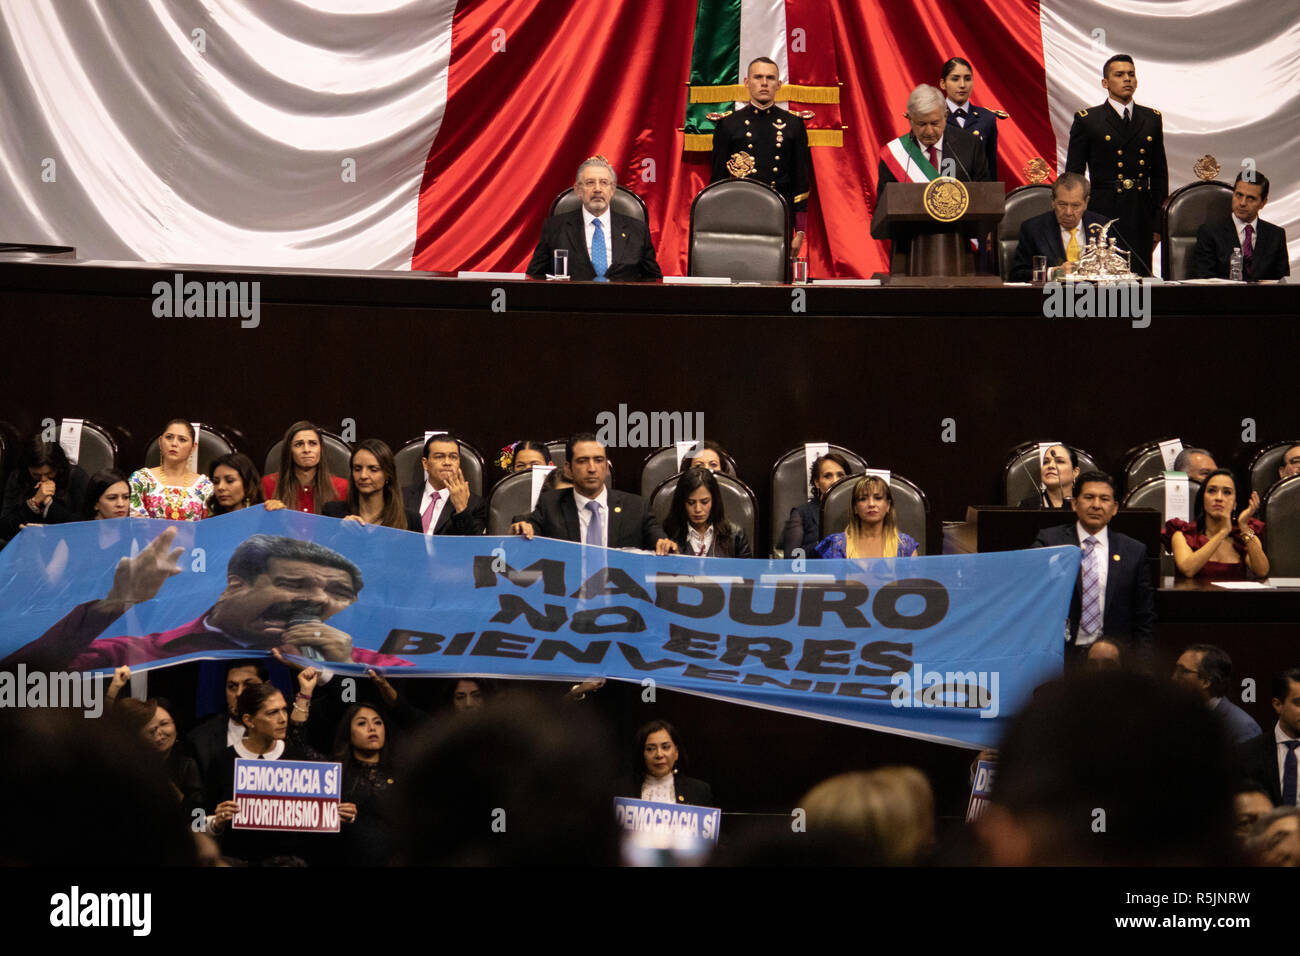 Mexiko Stadt, Mexico. 01st Dec, 2018. 'Maduro, you're not welcome', says the poster held up by a group of parliamentarians at the inauguration of left-wing politician Andres Manuel Lopez Obrador (3rd from right, top row). Lopez Obrador was the first left-wing president of Mexico in over 70 years to take the oath of office. Credit: Gerardo Vieyra/dpa/Alamy Live News Stock Photo